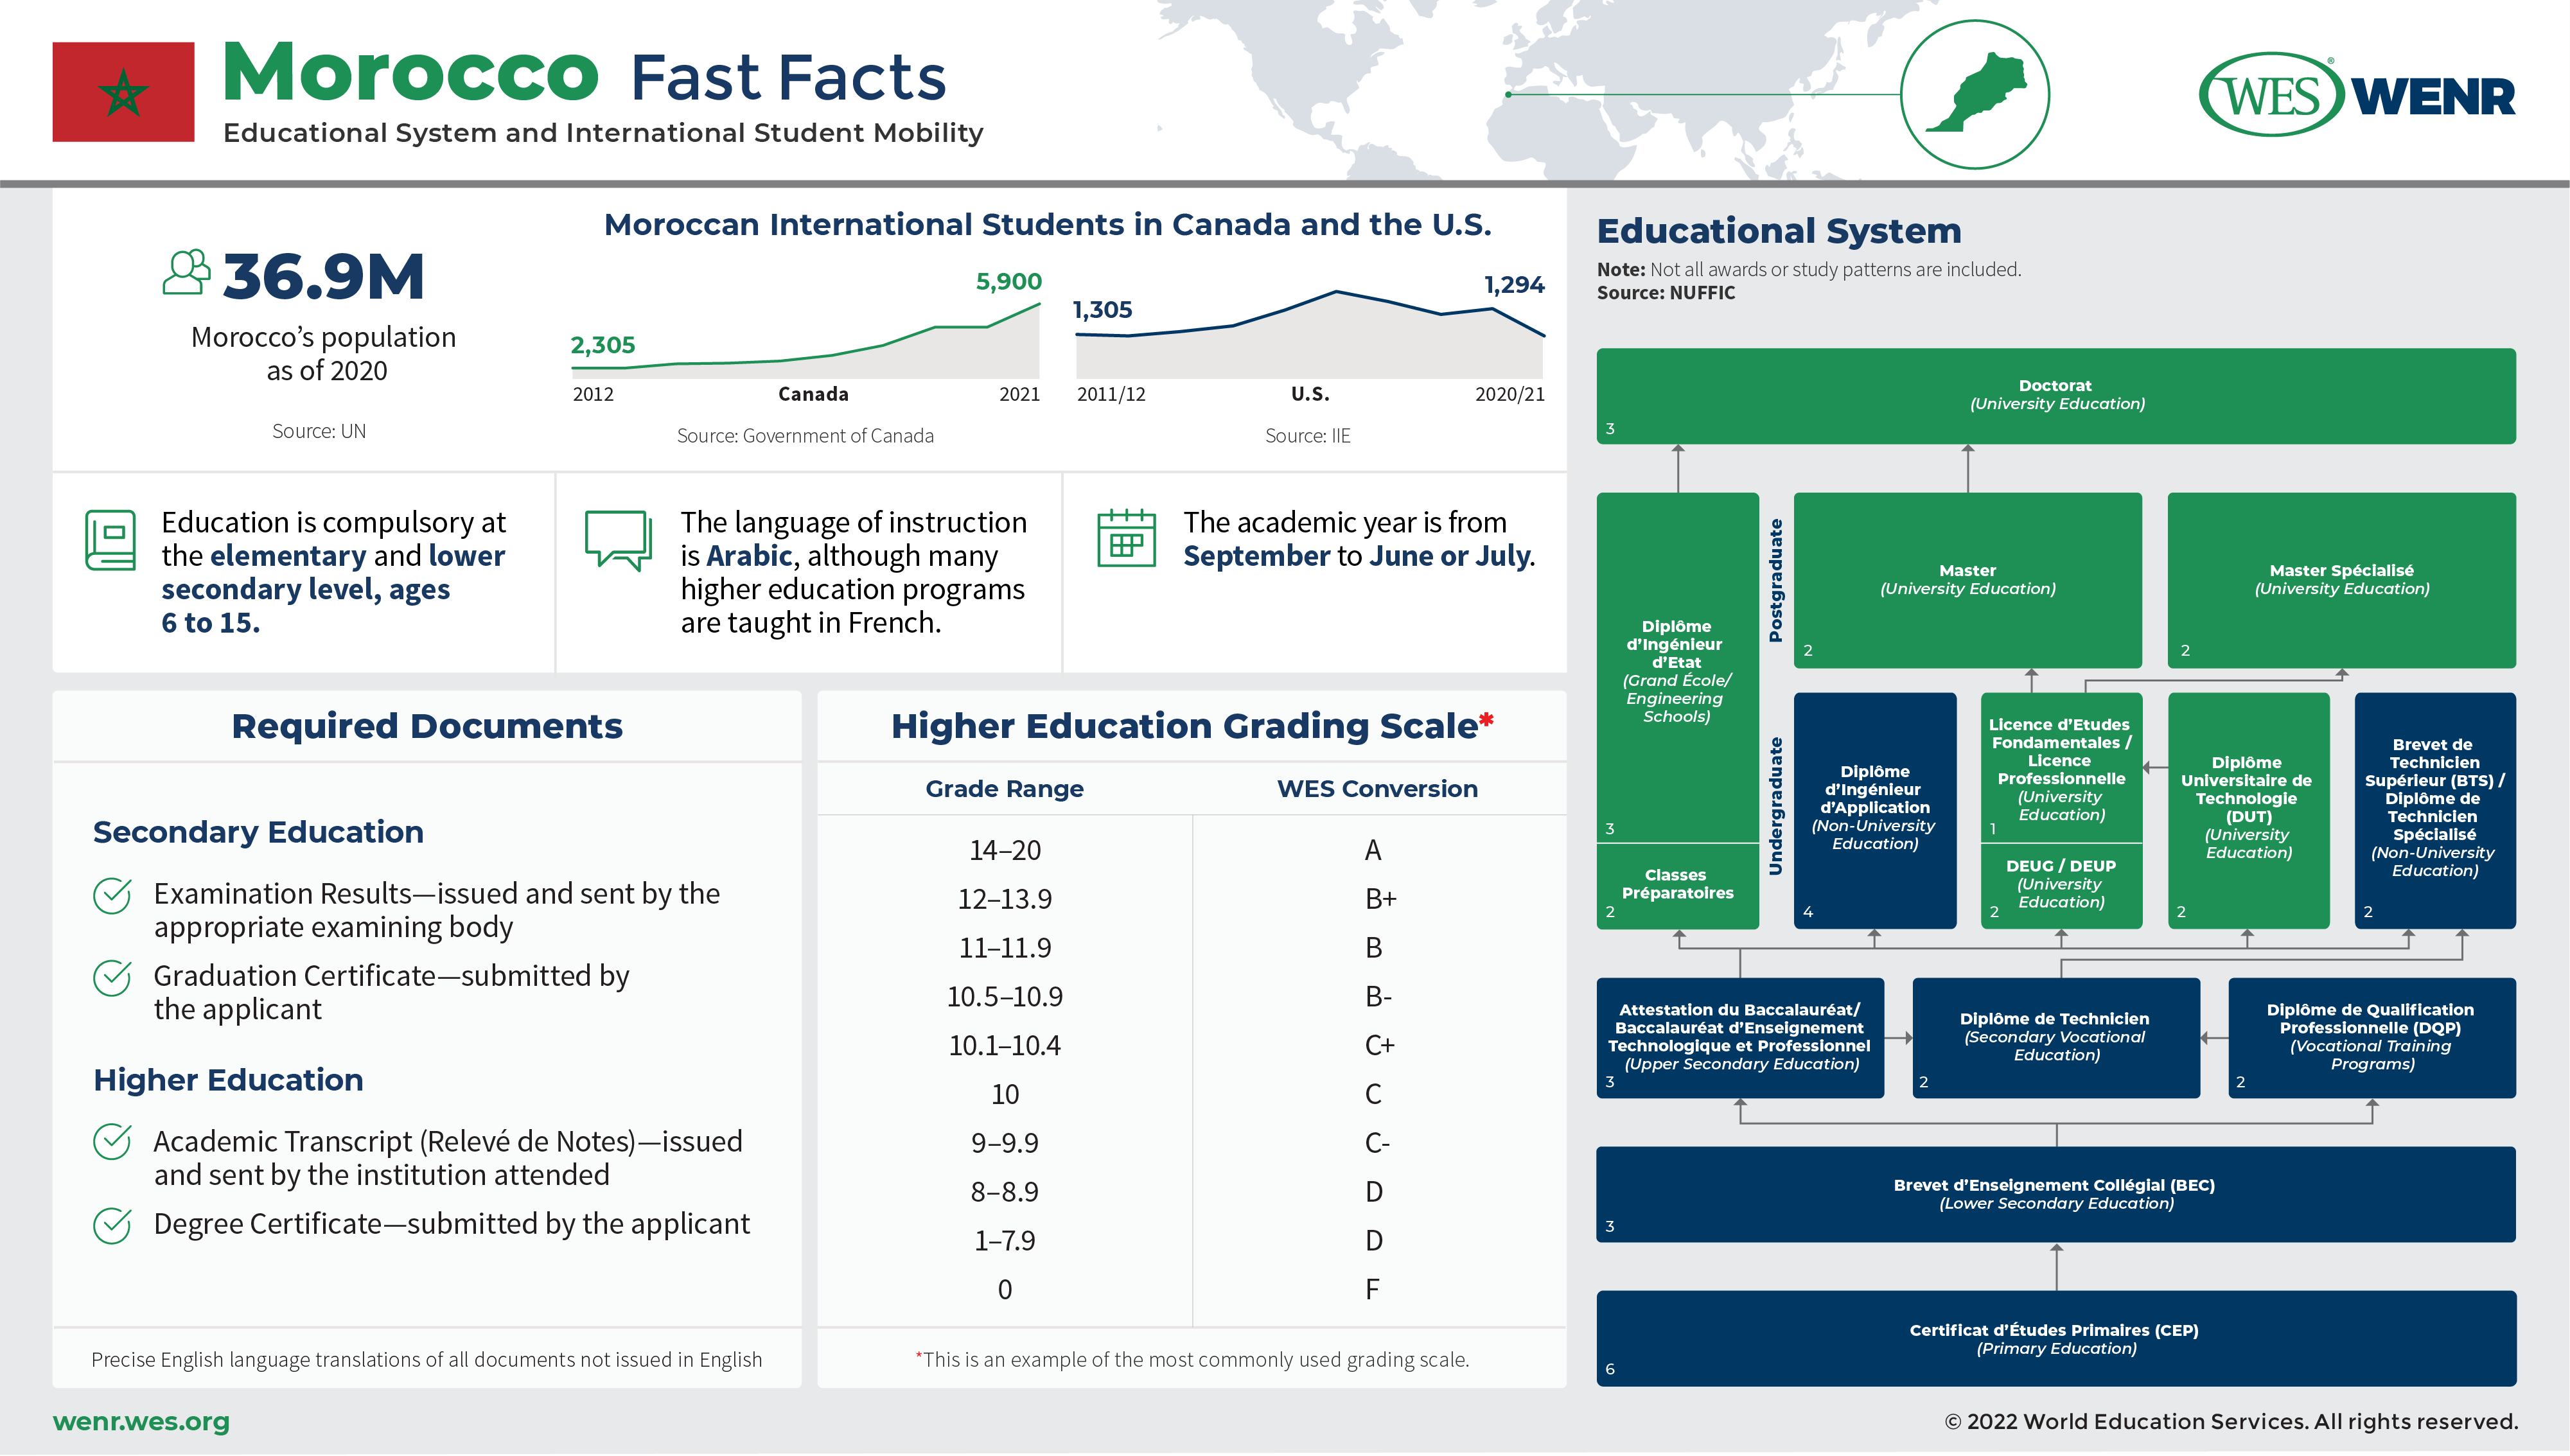 An infographic with fast facts on Mongolia's educational system and international student mobility.